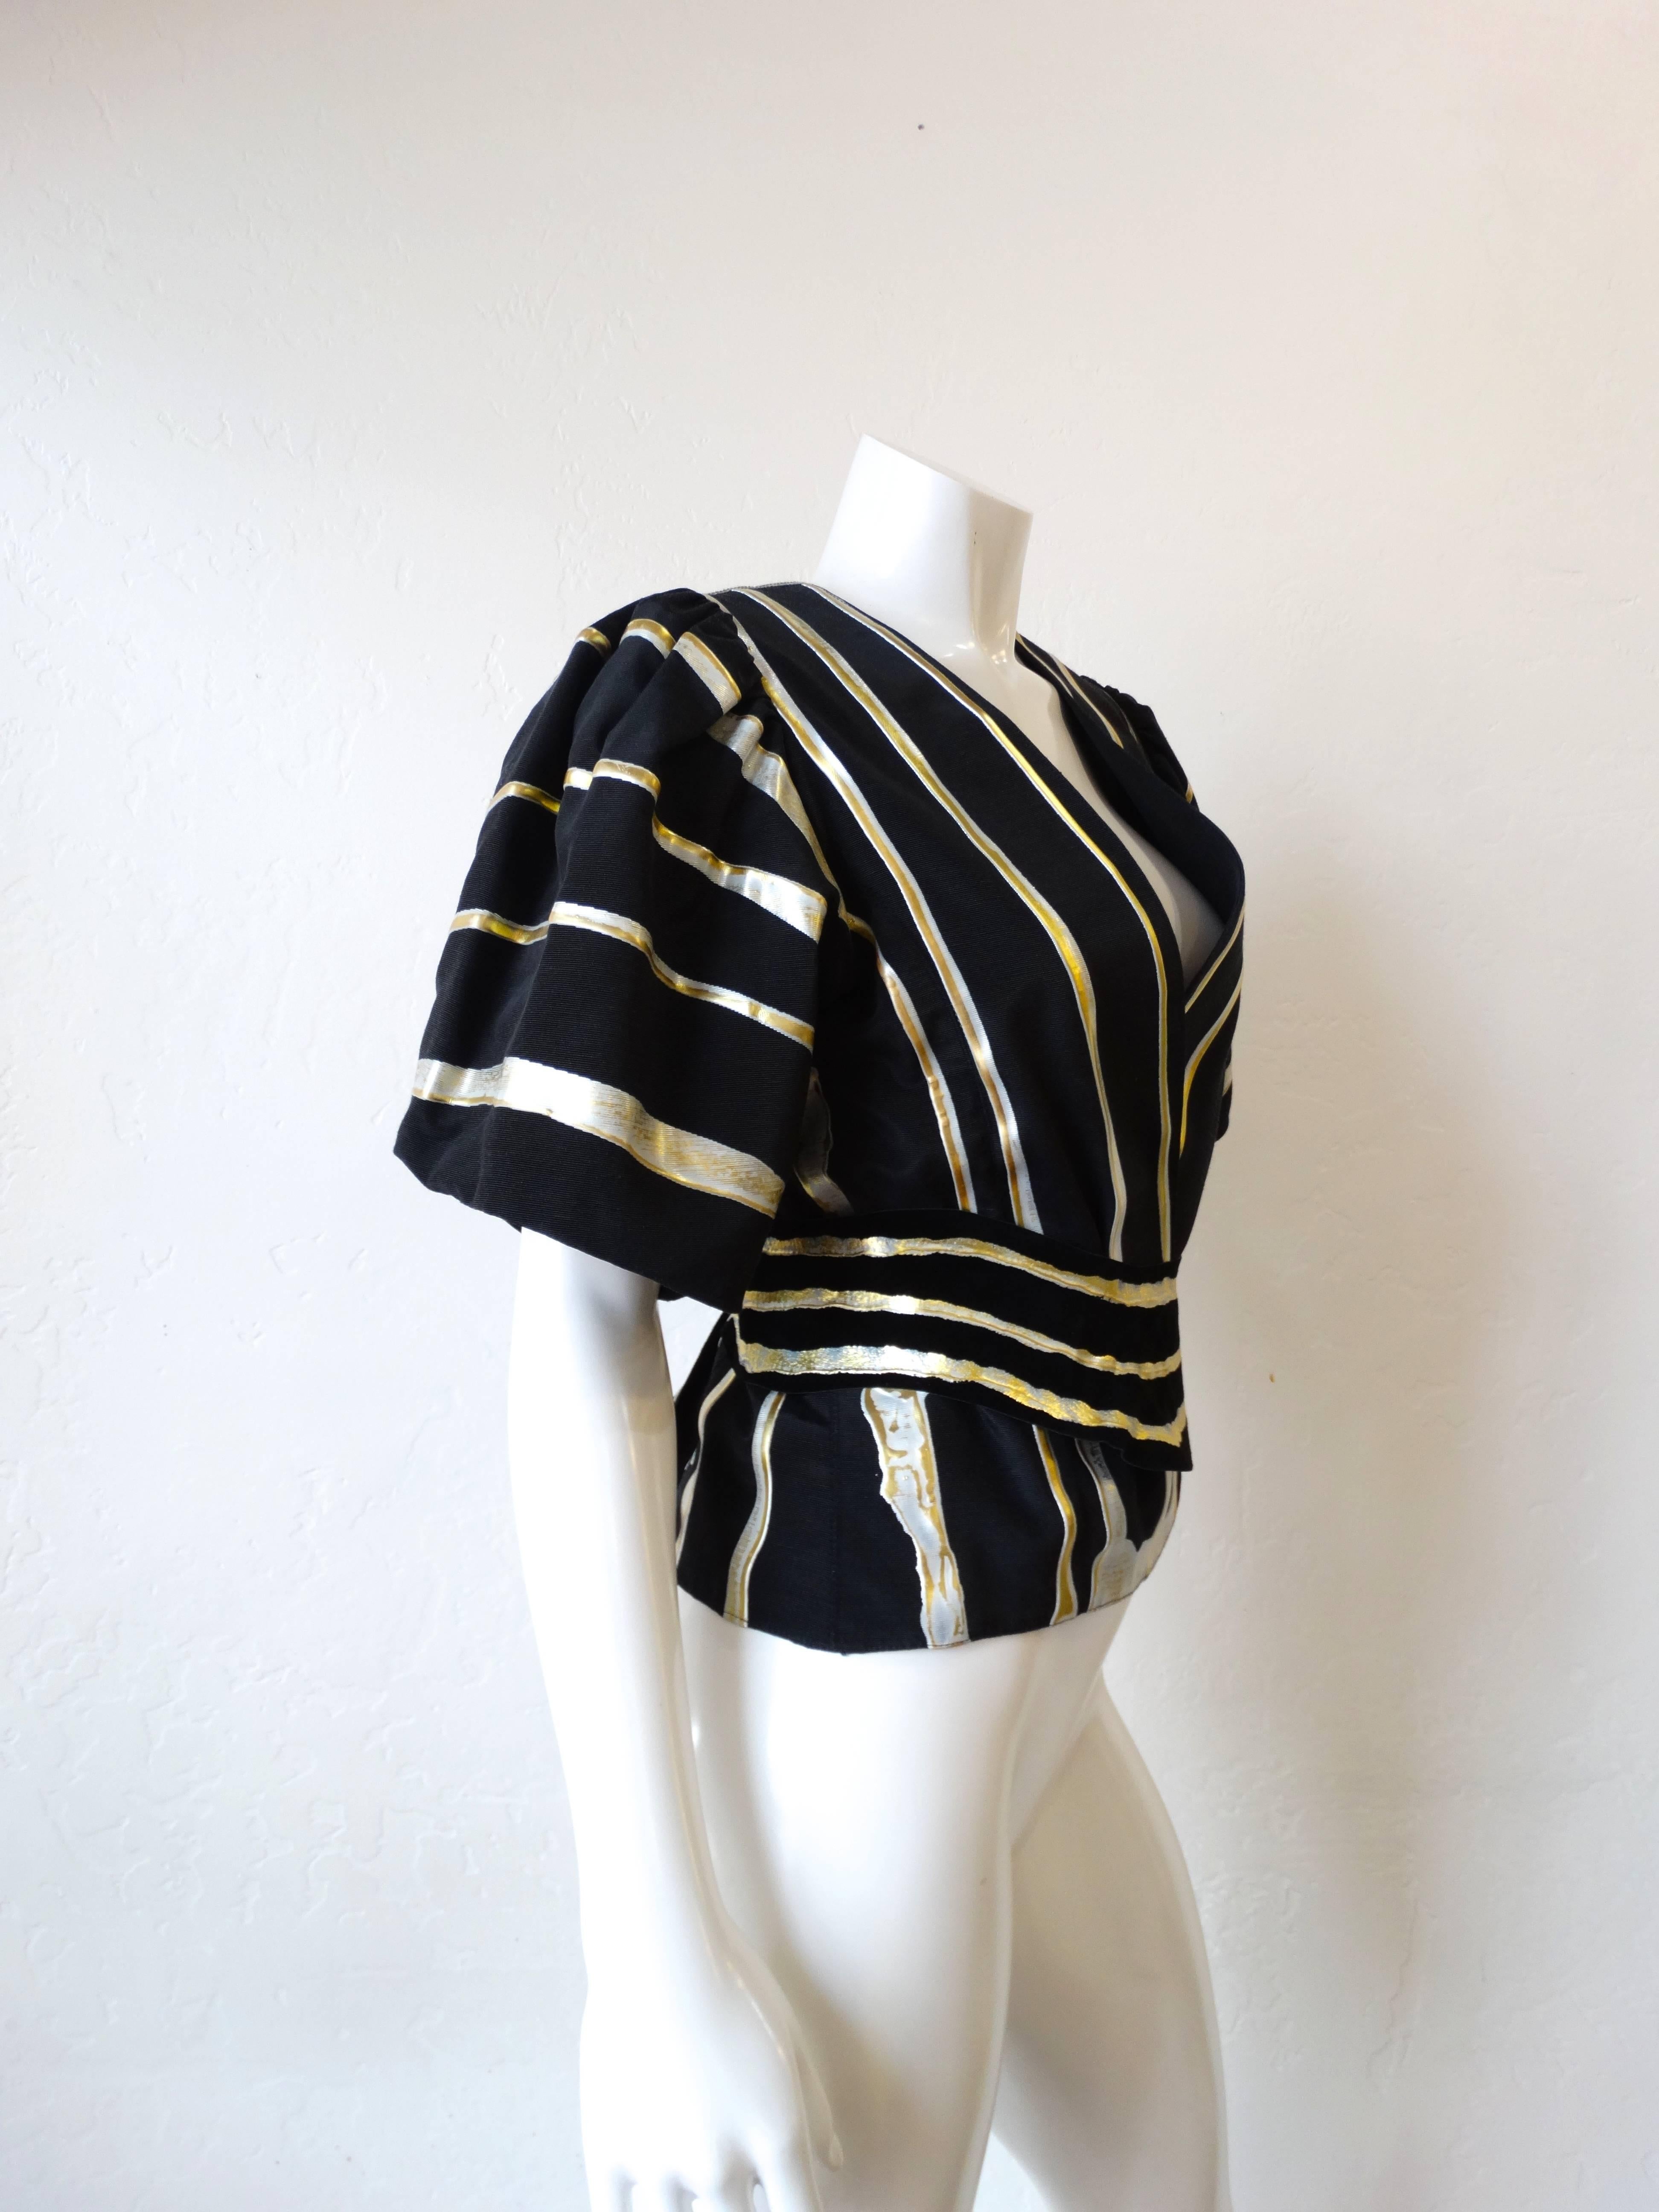 Amazing 1980s I. Magnin hand painted blouse! Super flattering fit with short blouson sleeves. Constructed with a black grosgrain texture fabric with silver and gold hand painted stripes throughout. Matching suede leather belt ties in the back or